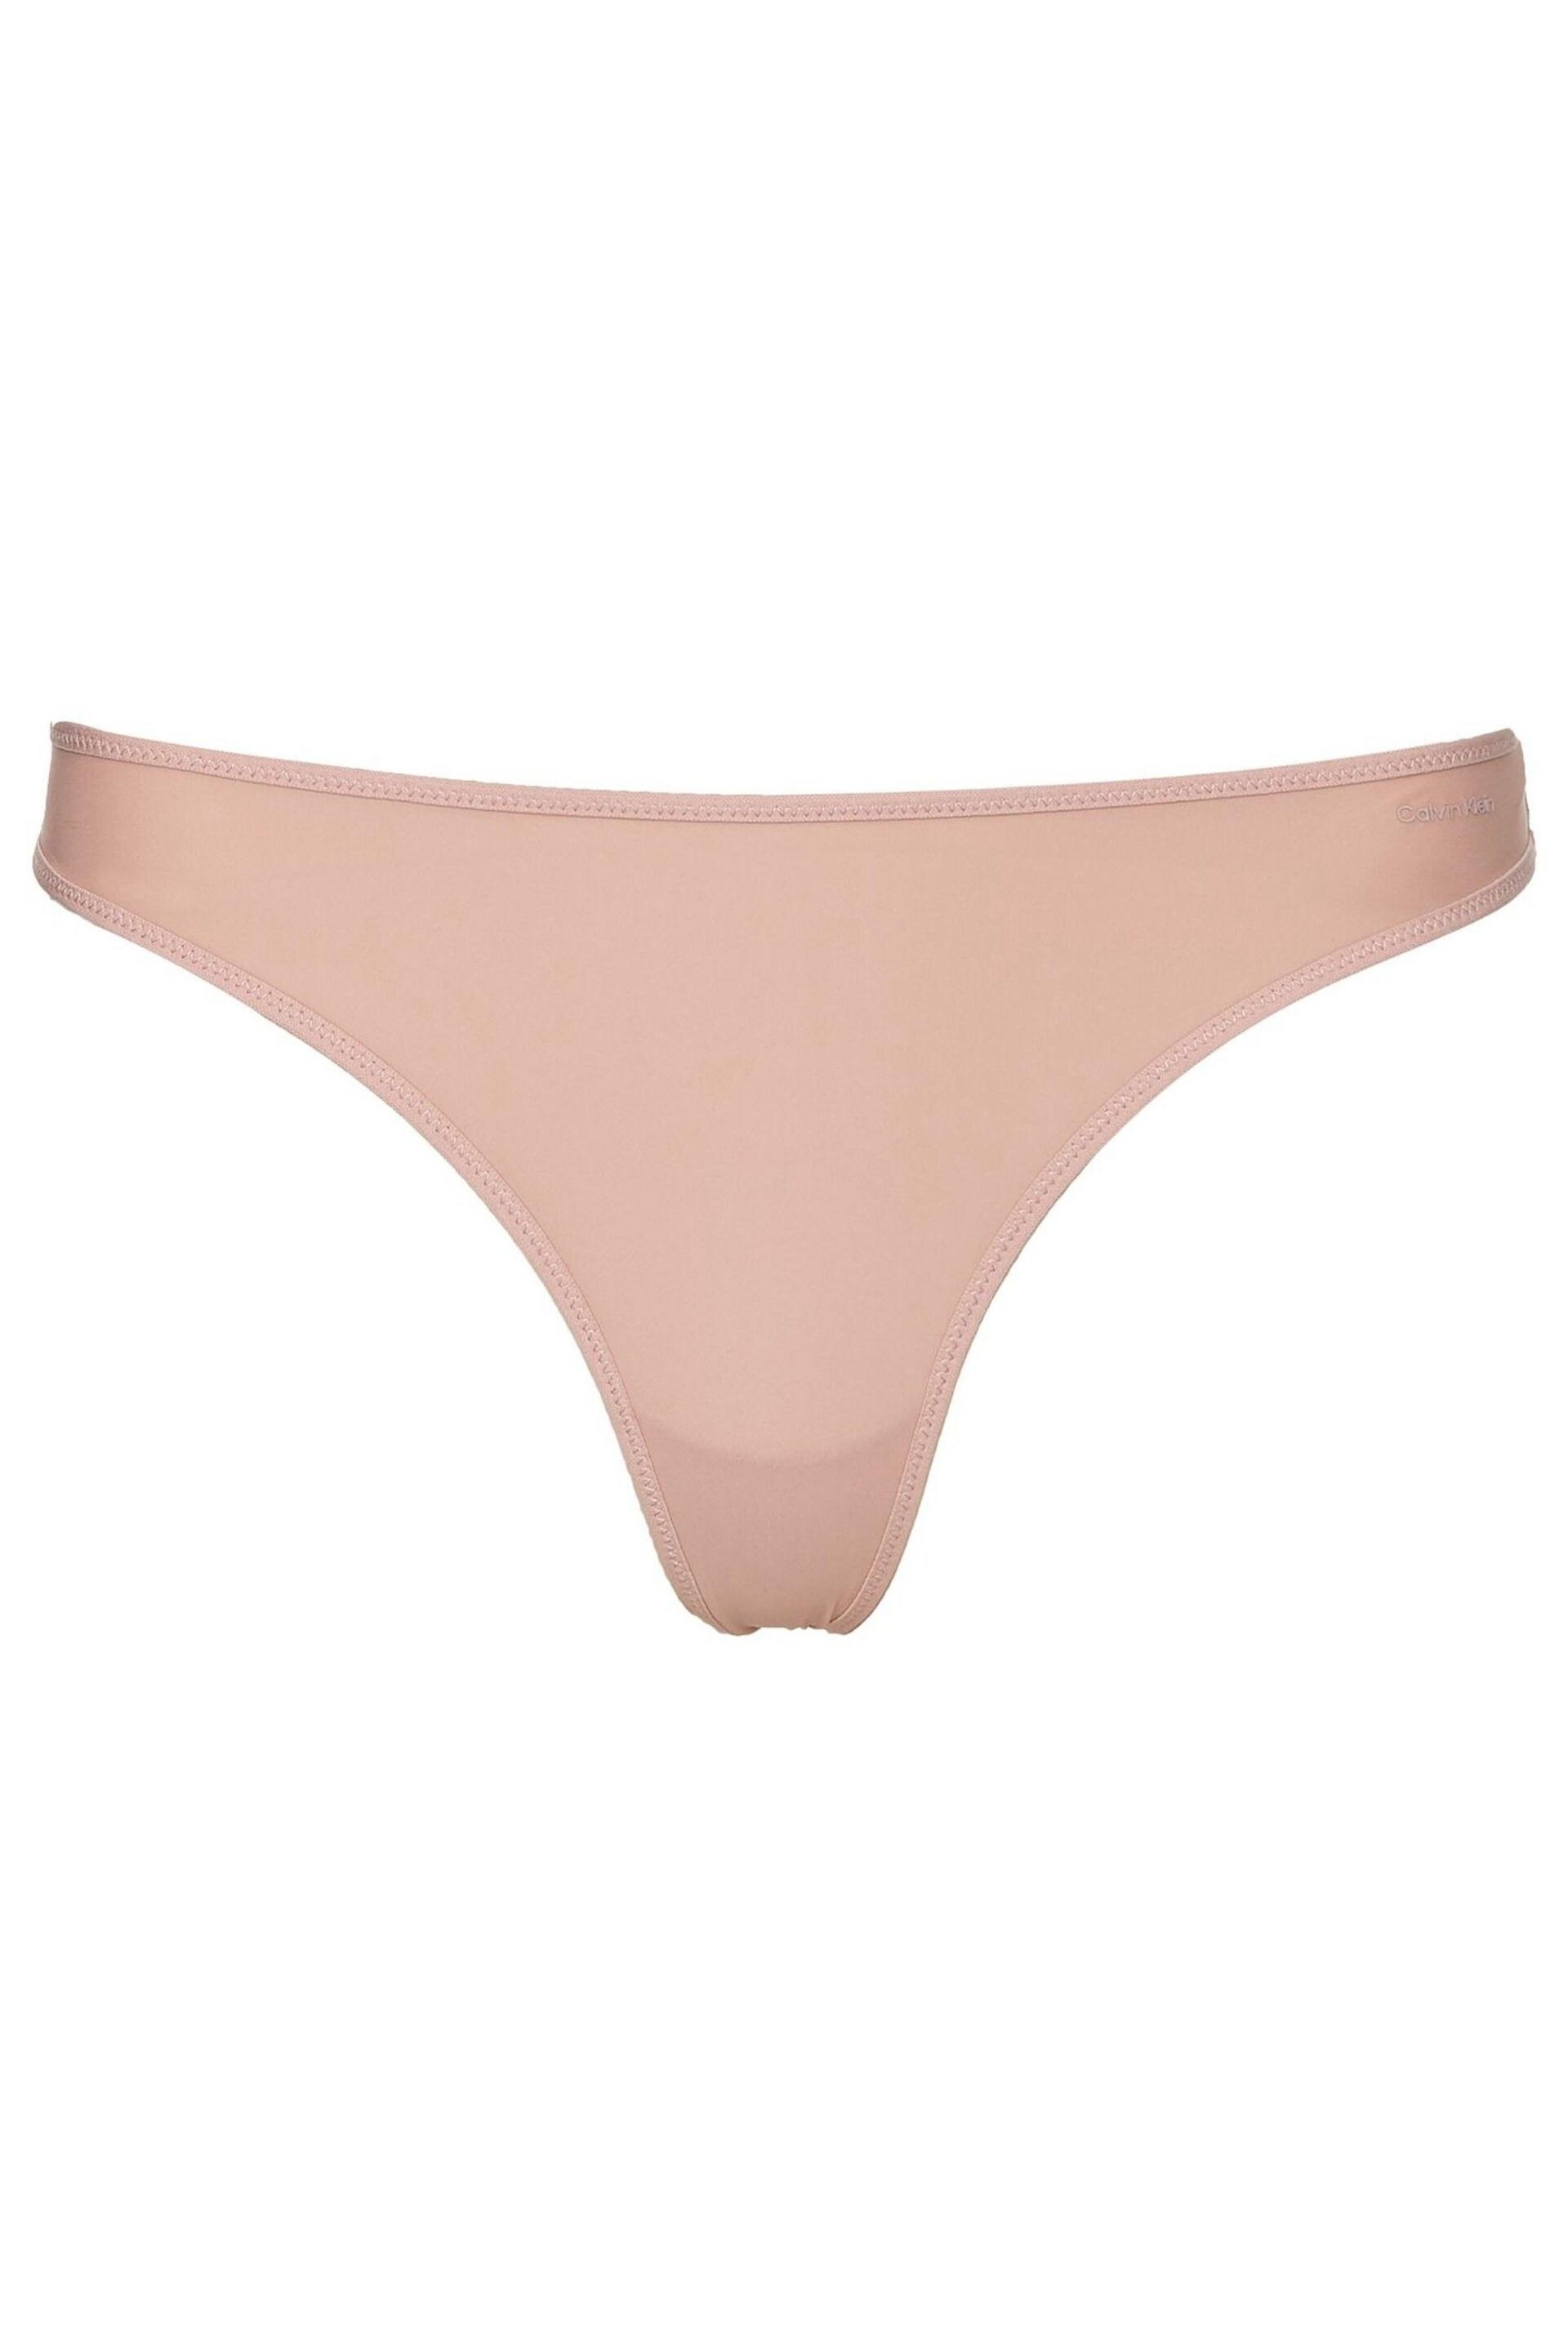 Calvin Klein Pink Marquisette Thong - Image 4 of 4